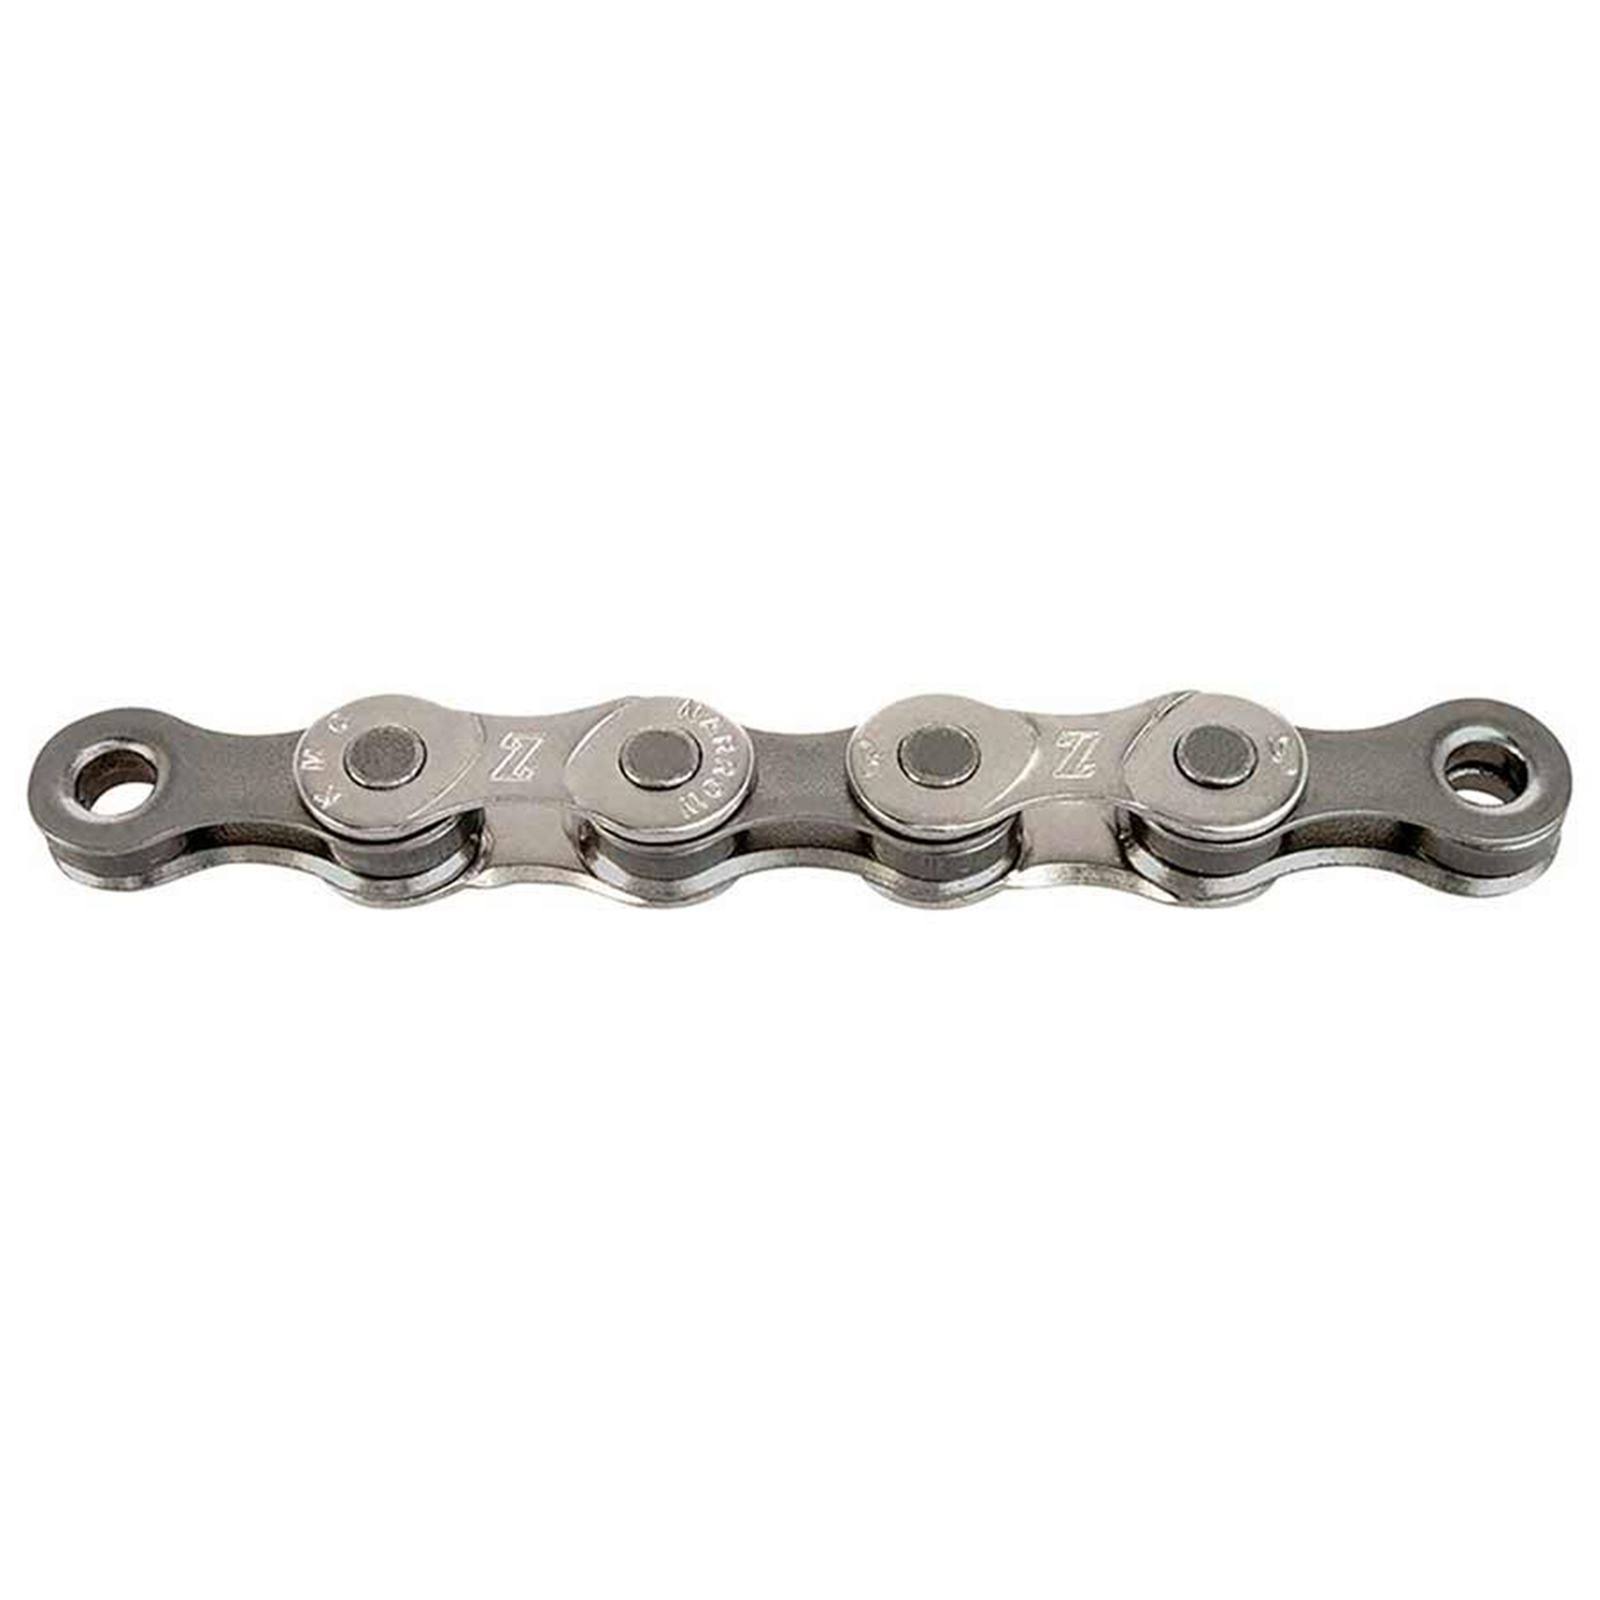 Kmc Z8.1 Chain 8-speed 116 Links Silver/gray Fits 6/7/8 Speed